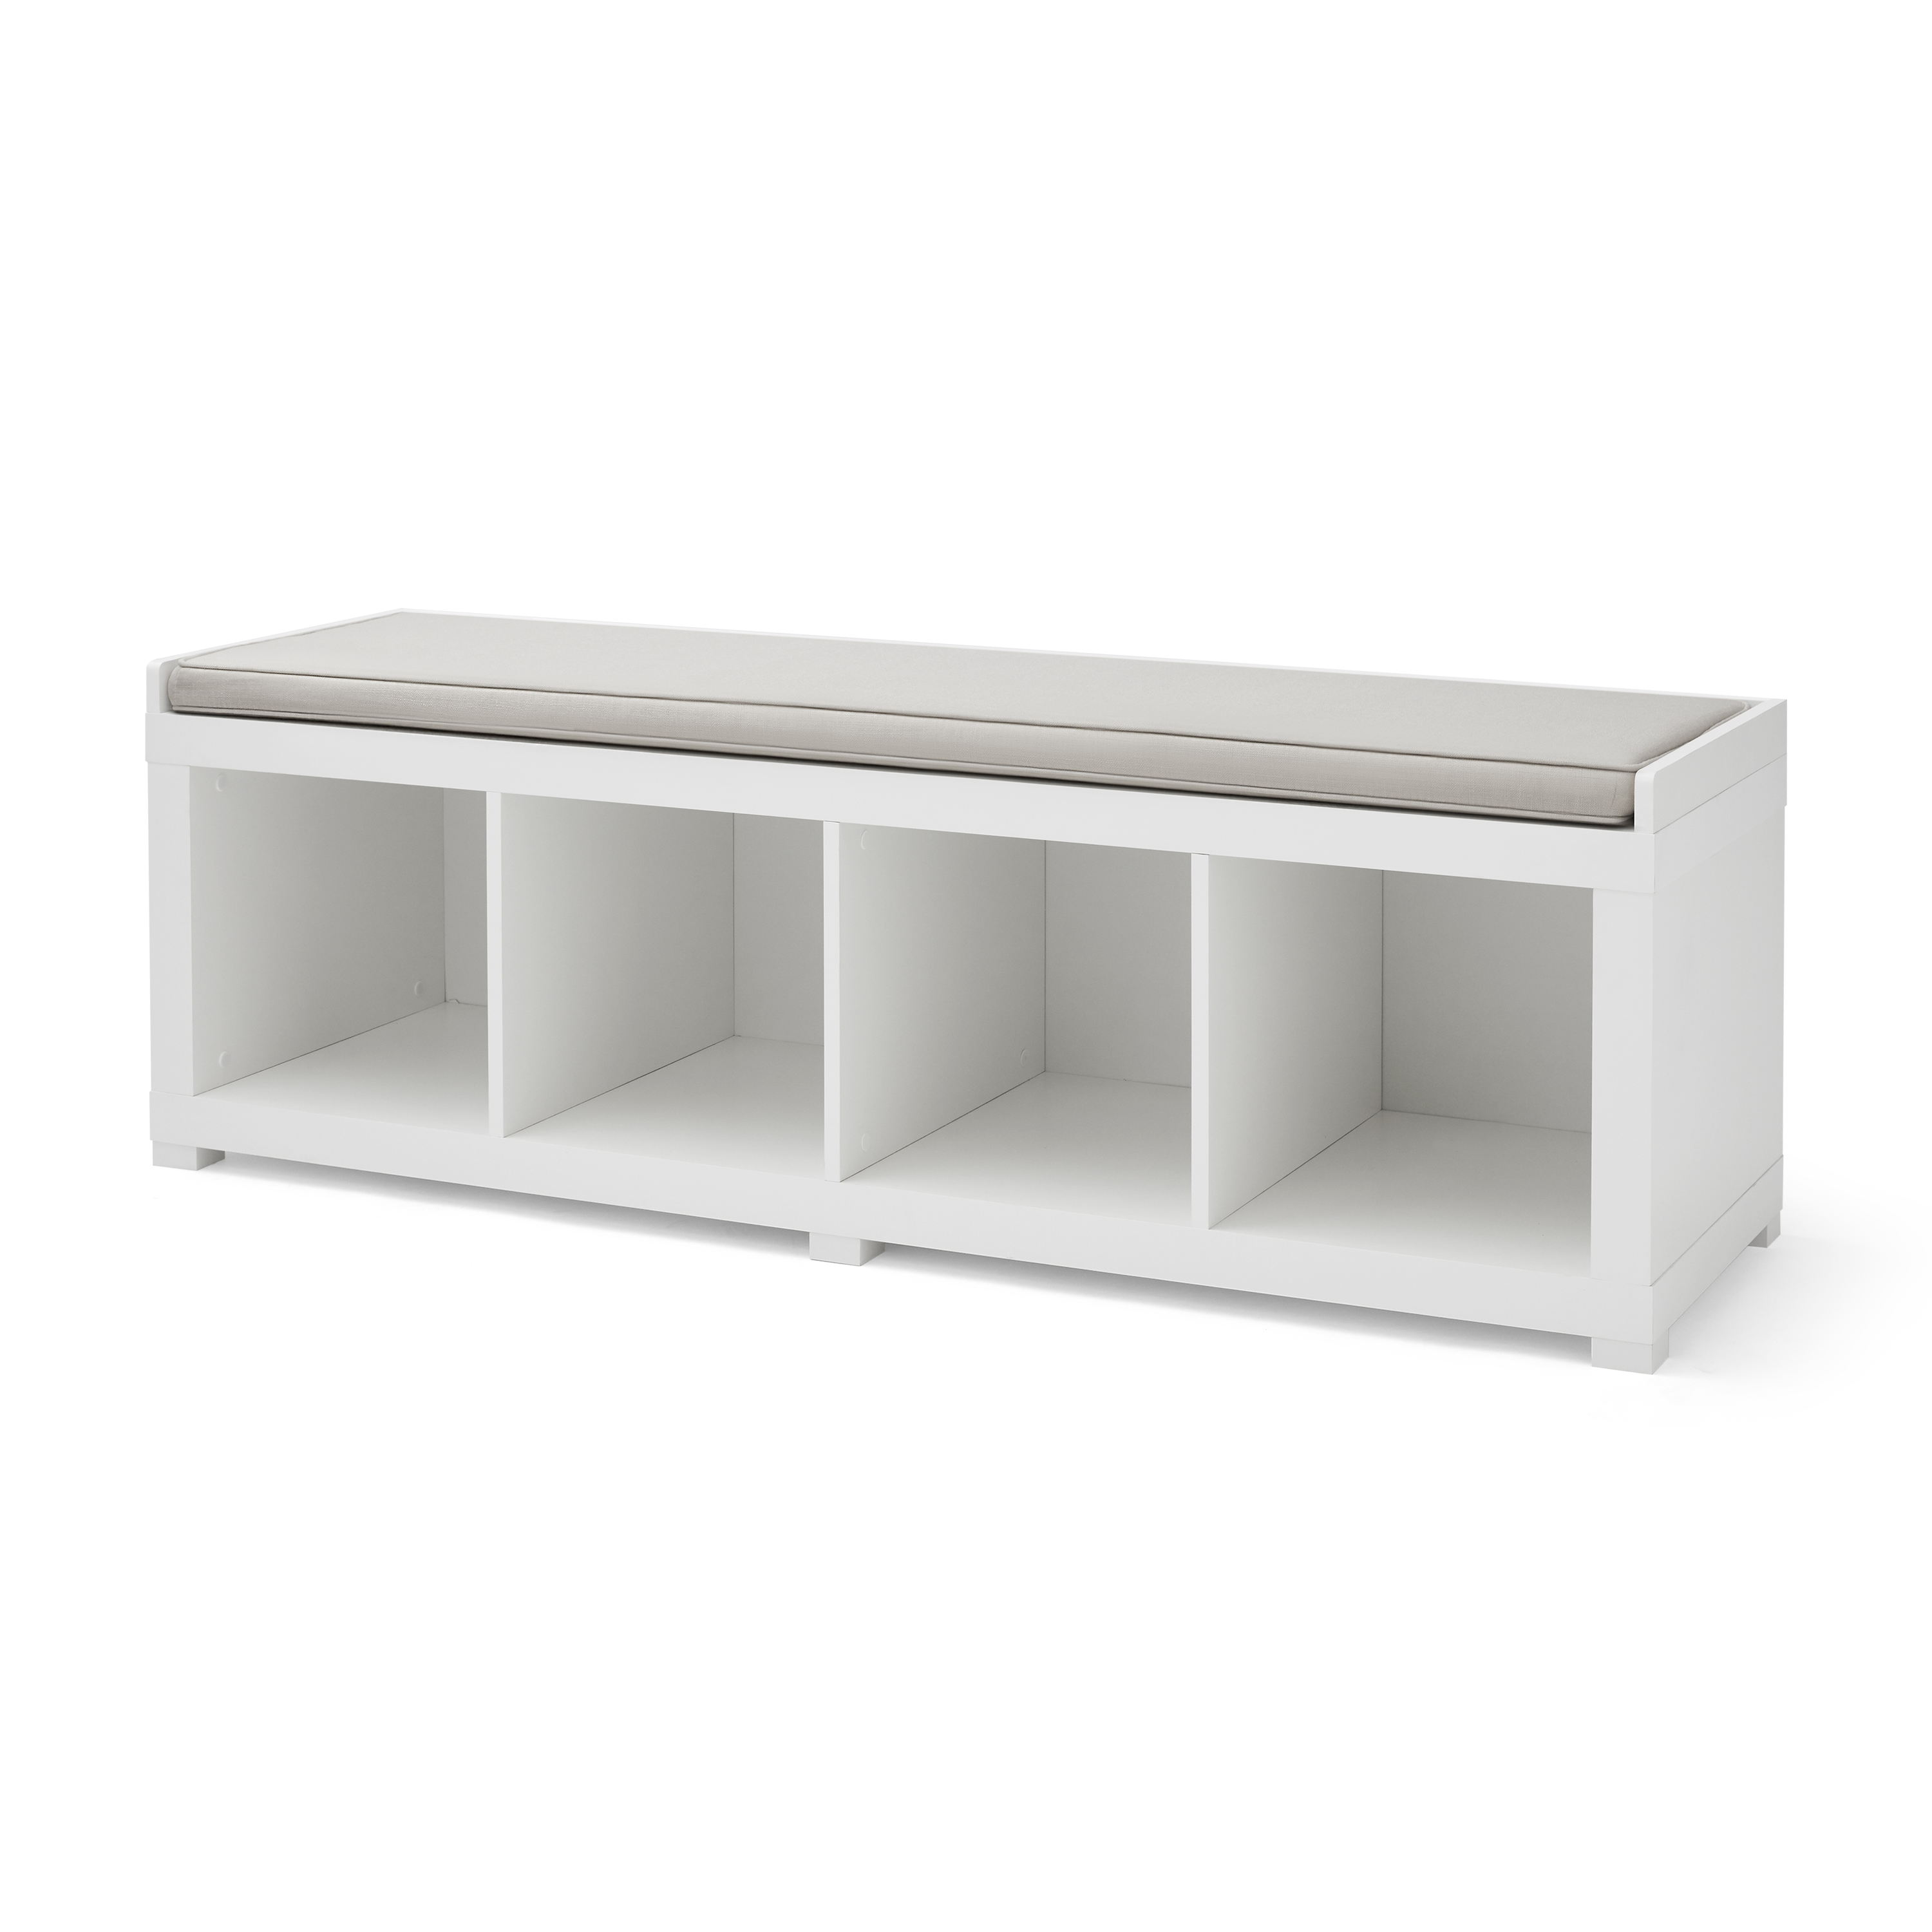 Better Homes & Gardens 4-Cube Shoe Storage Bench, White - image 2 of 6